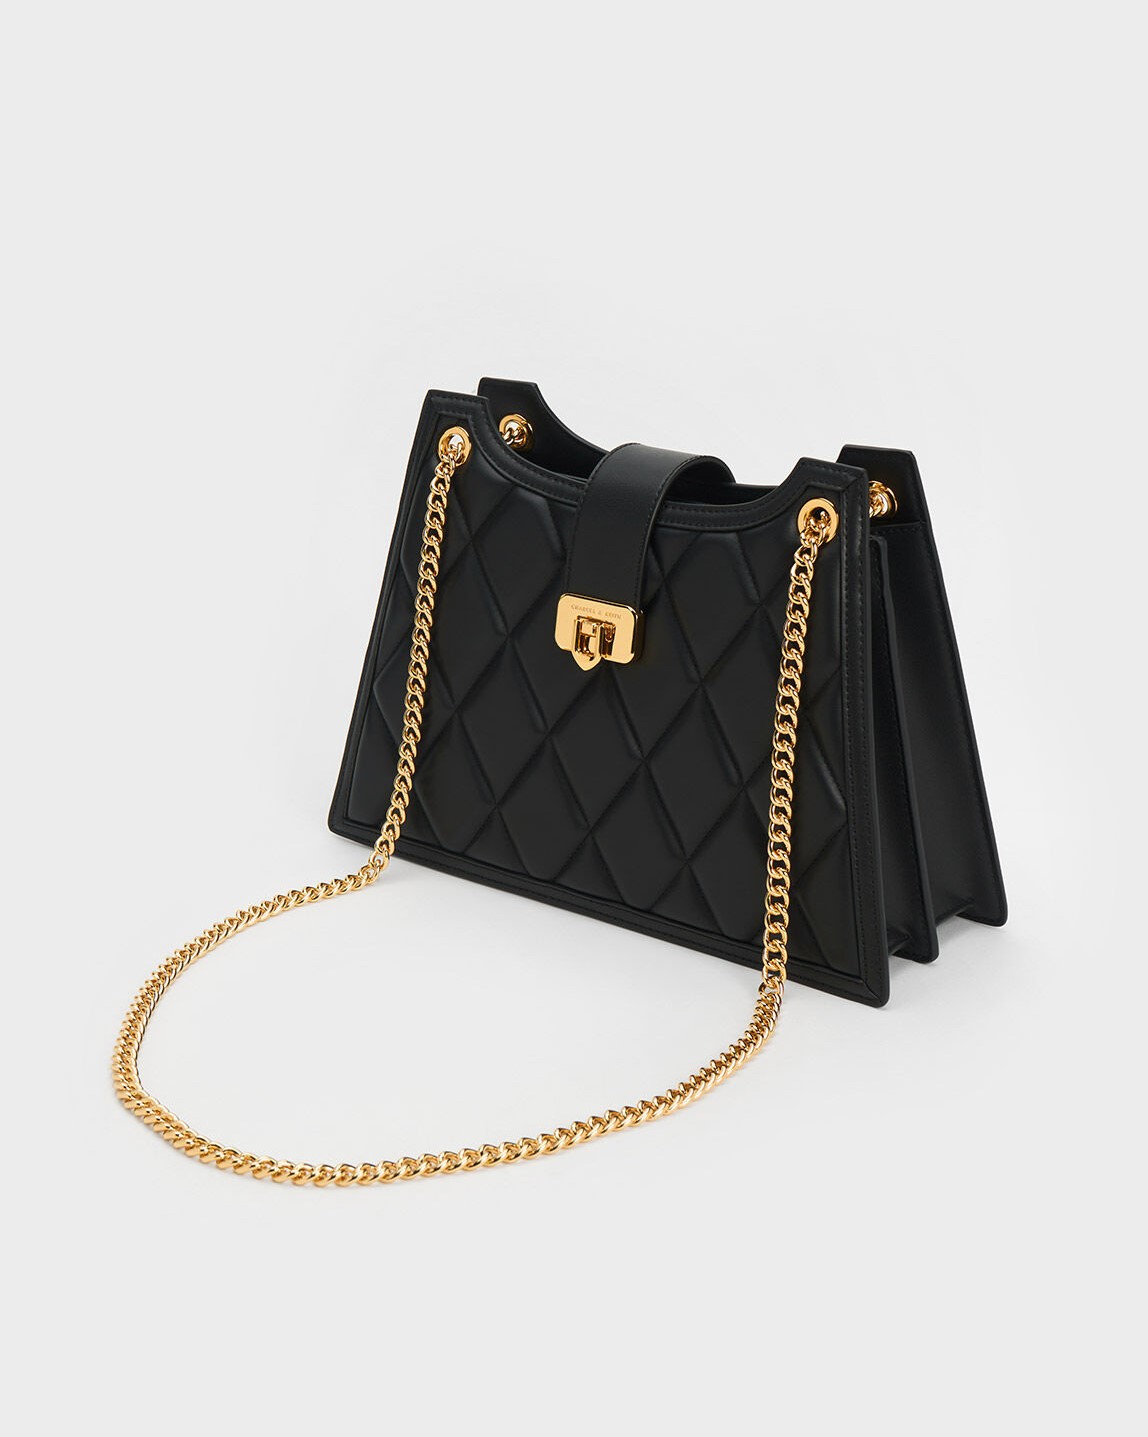 TÚI ĐEO CHÉO CNK CHARLES KEITH CRESSIDA QUILTED TRAPEZE CHAIN BAG CK2-30151307 9